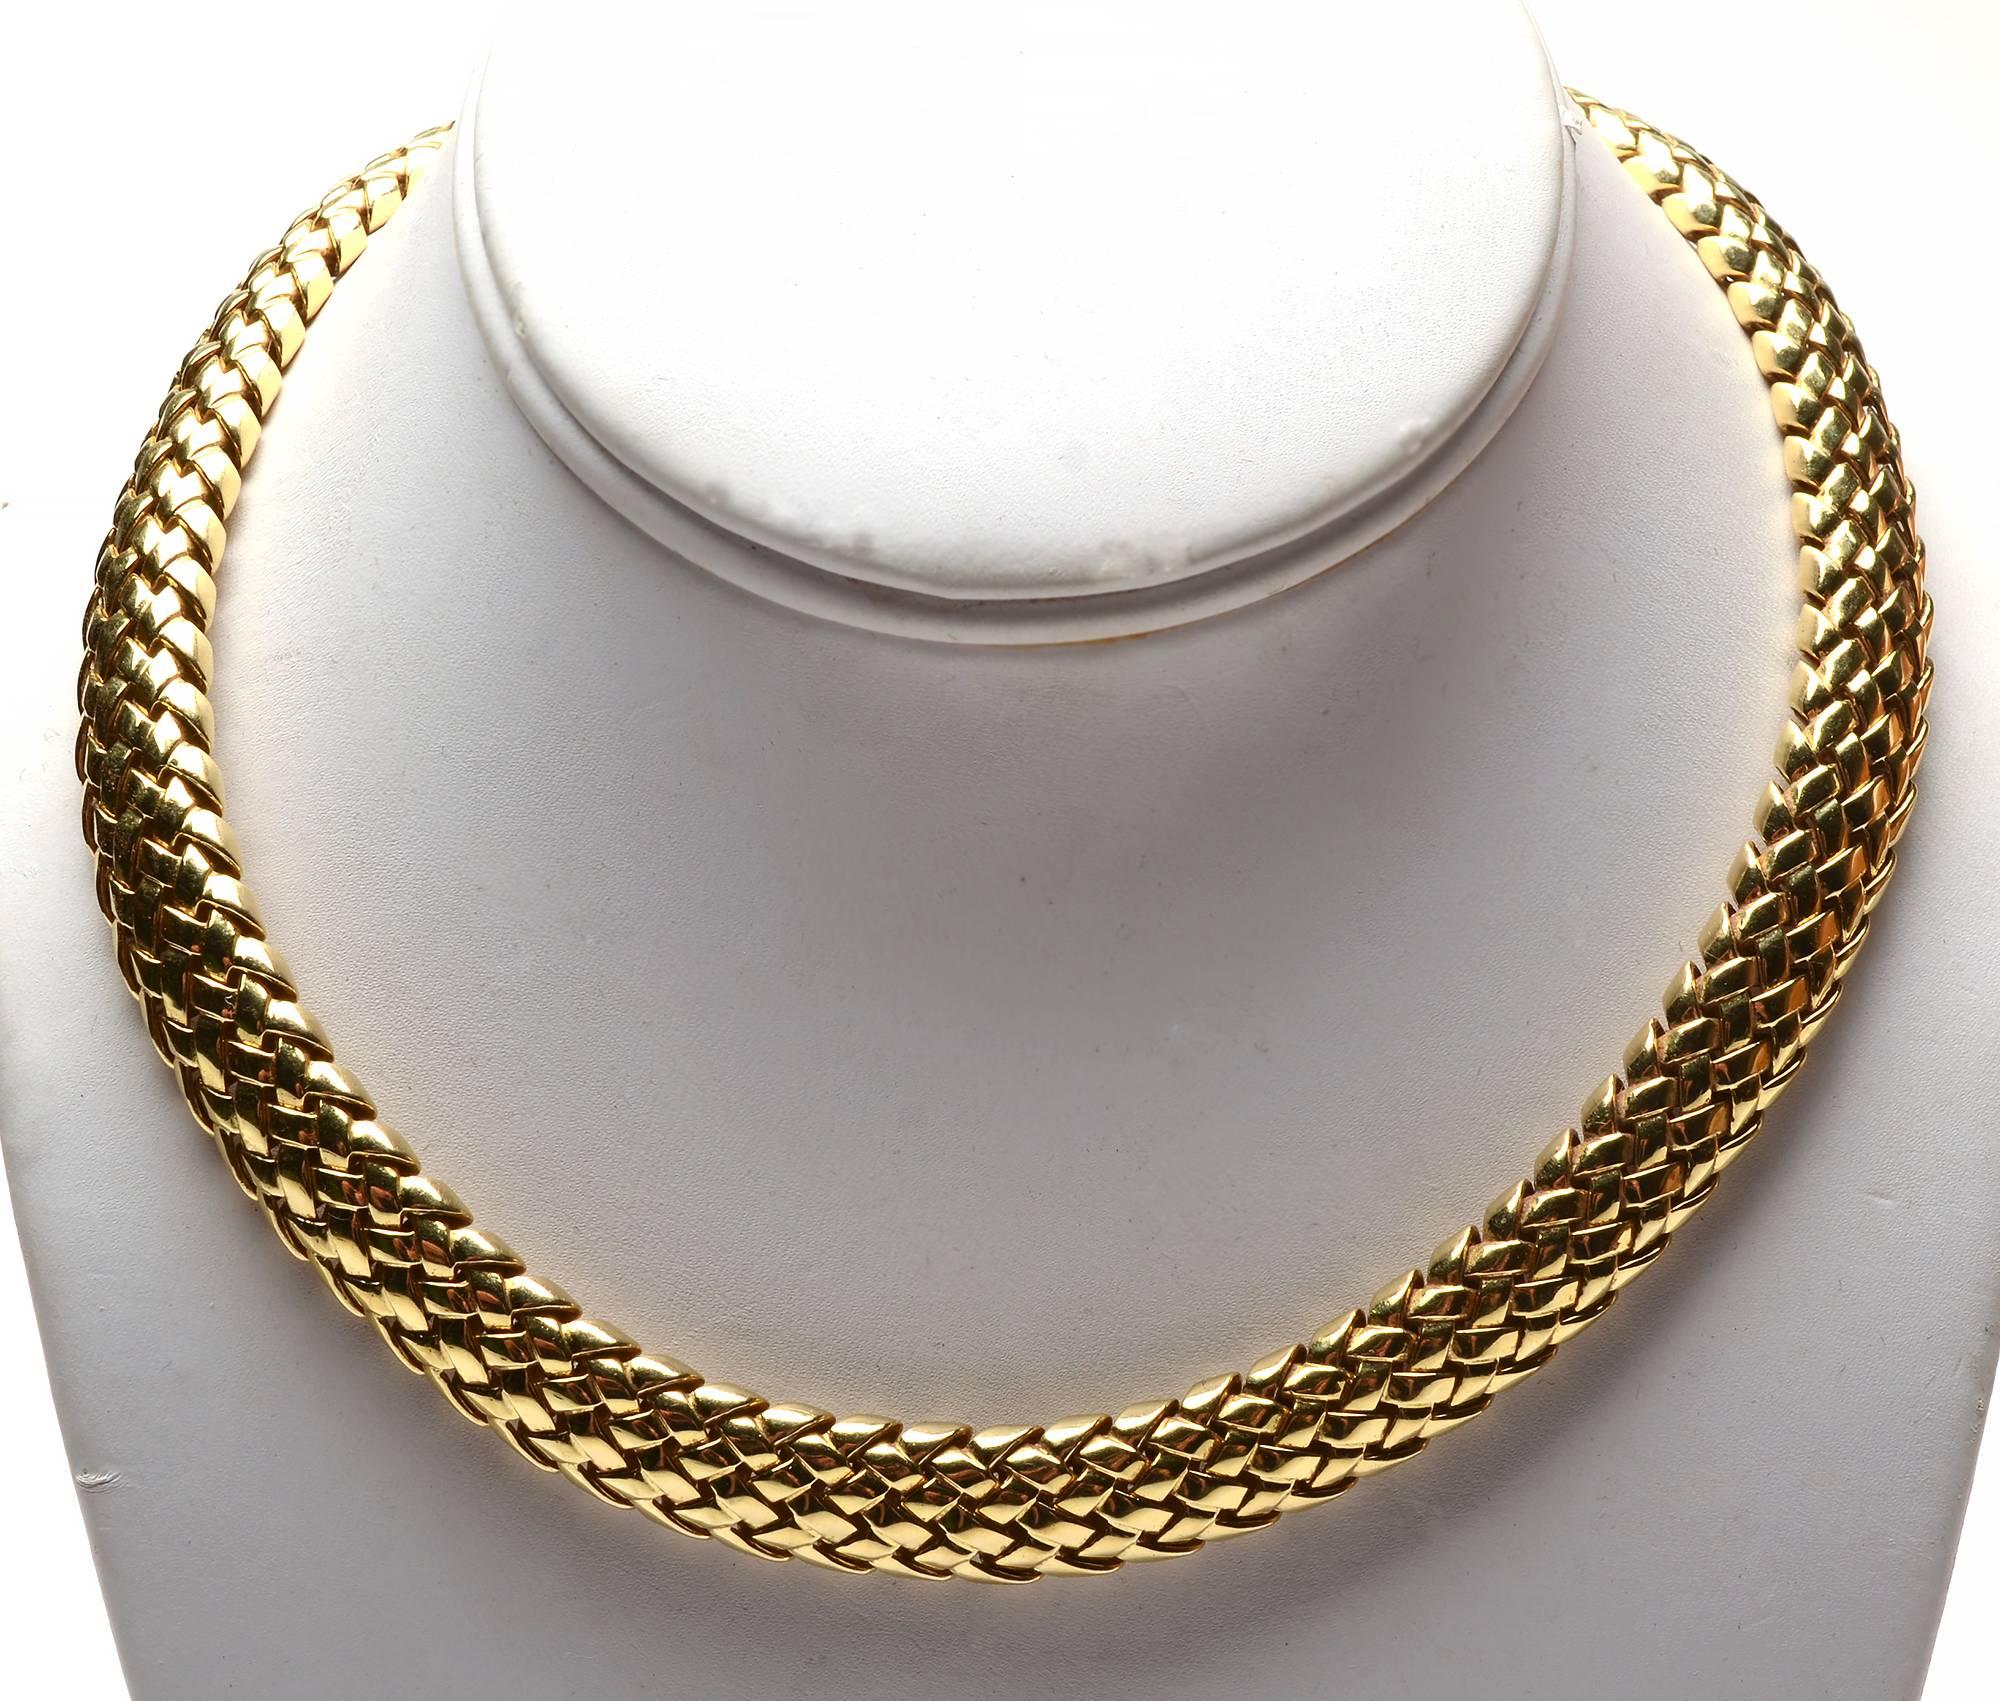 This is a substantial, timeless 18 karat gold choker necklace by Tiffany and Co. The woven width is half an inch and 16 1/4